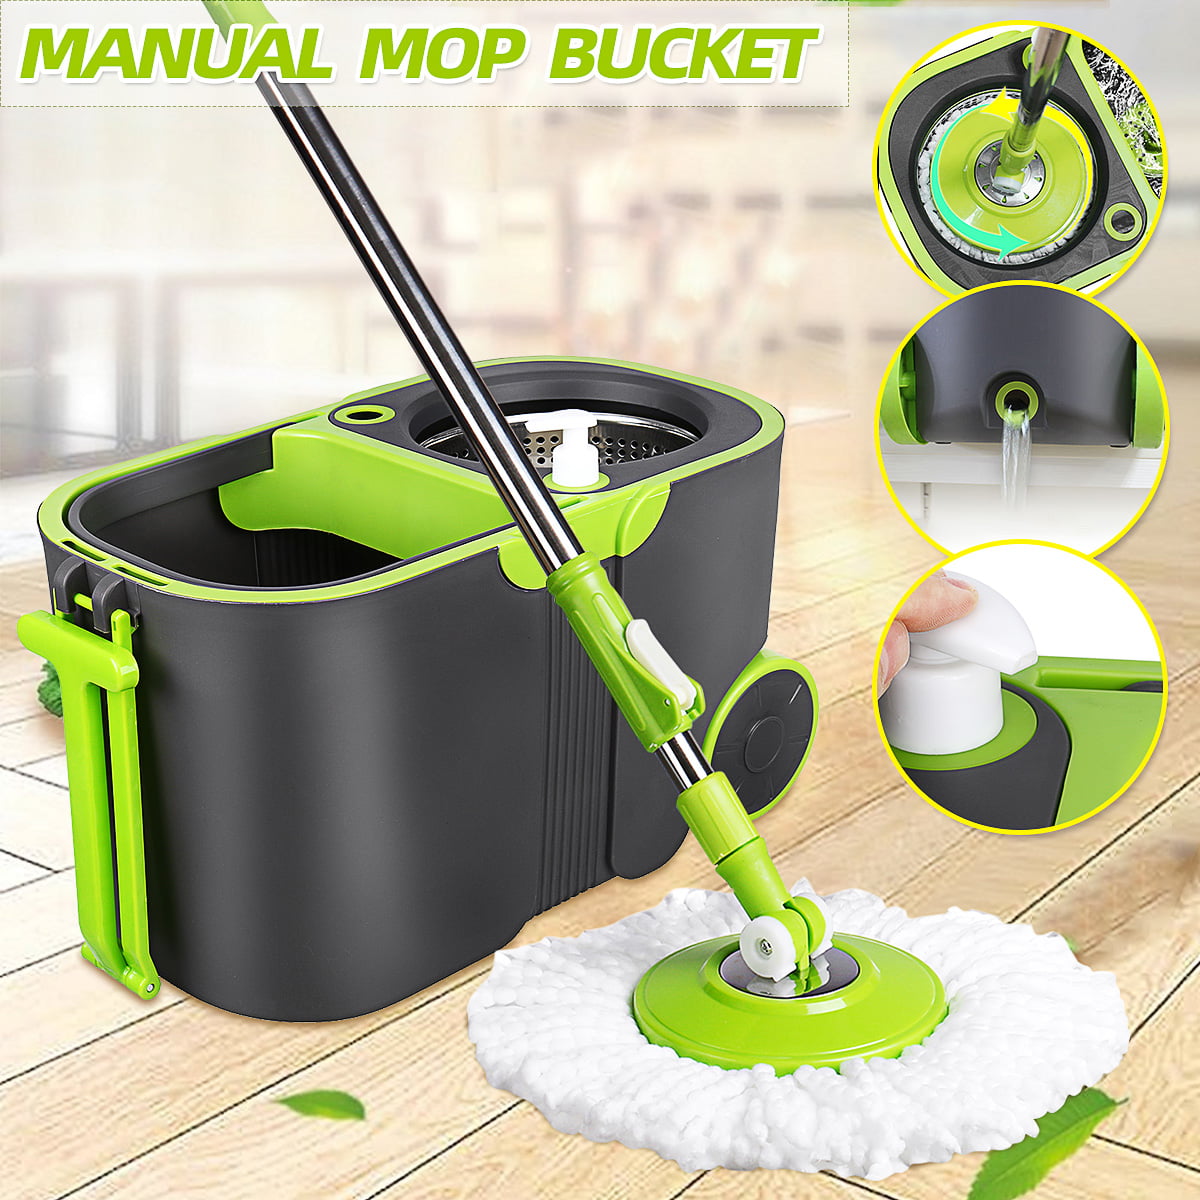 360 DEGREE SPINNING MOP BUCKET HOME 2 MOP CLEANING HEADS WITH COLLAPSIBLE BUCKET 